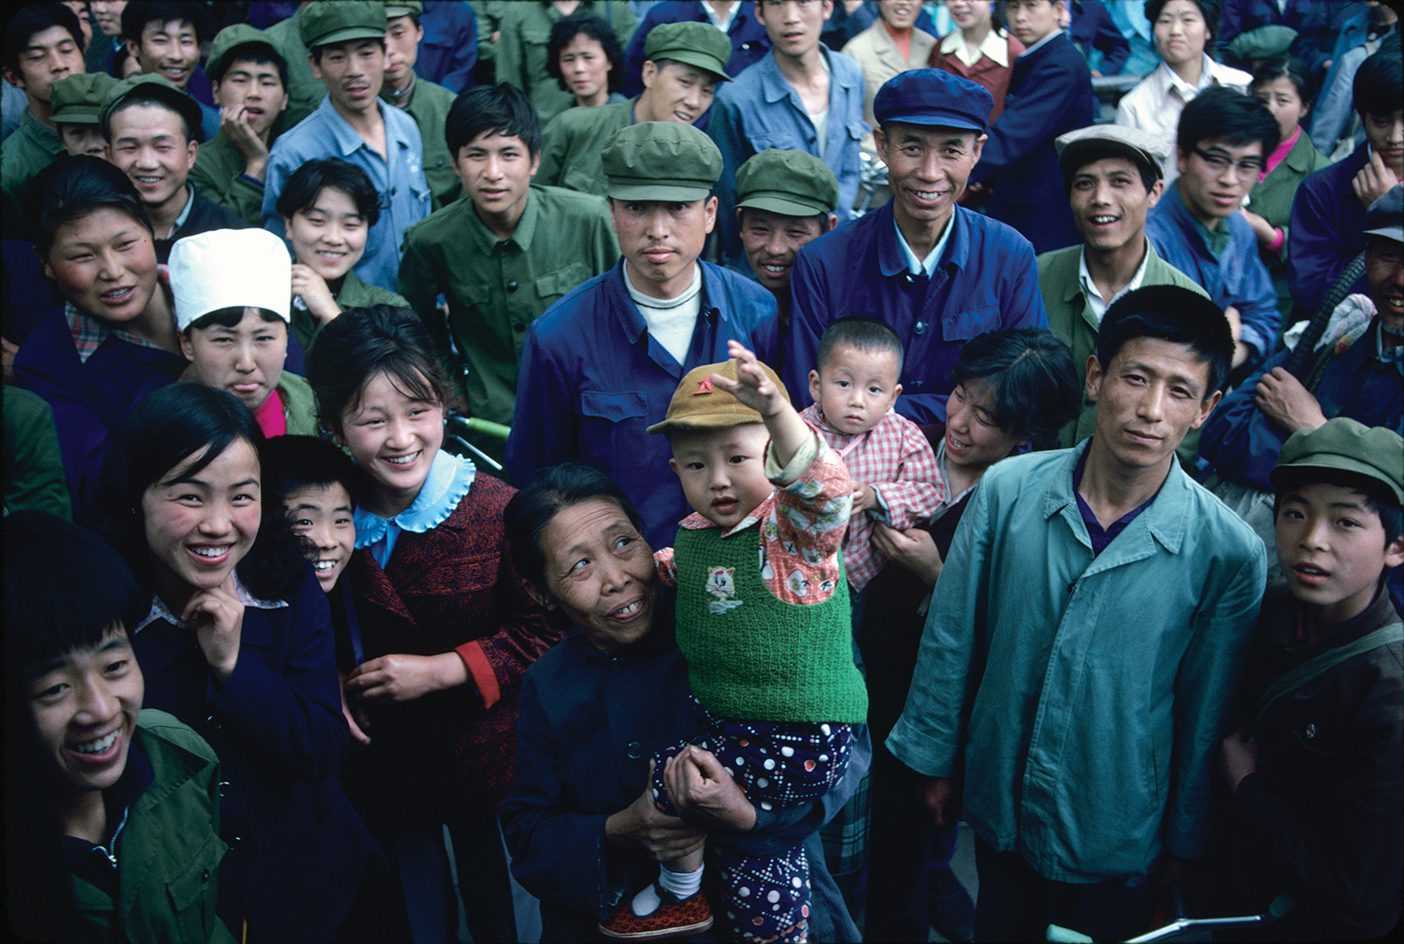 A crowd of people in 1979 China.